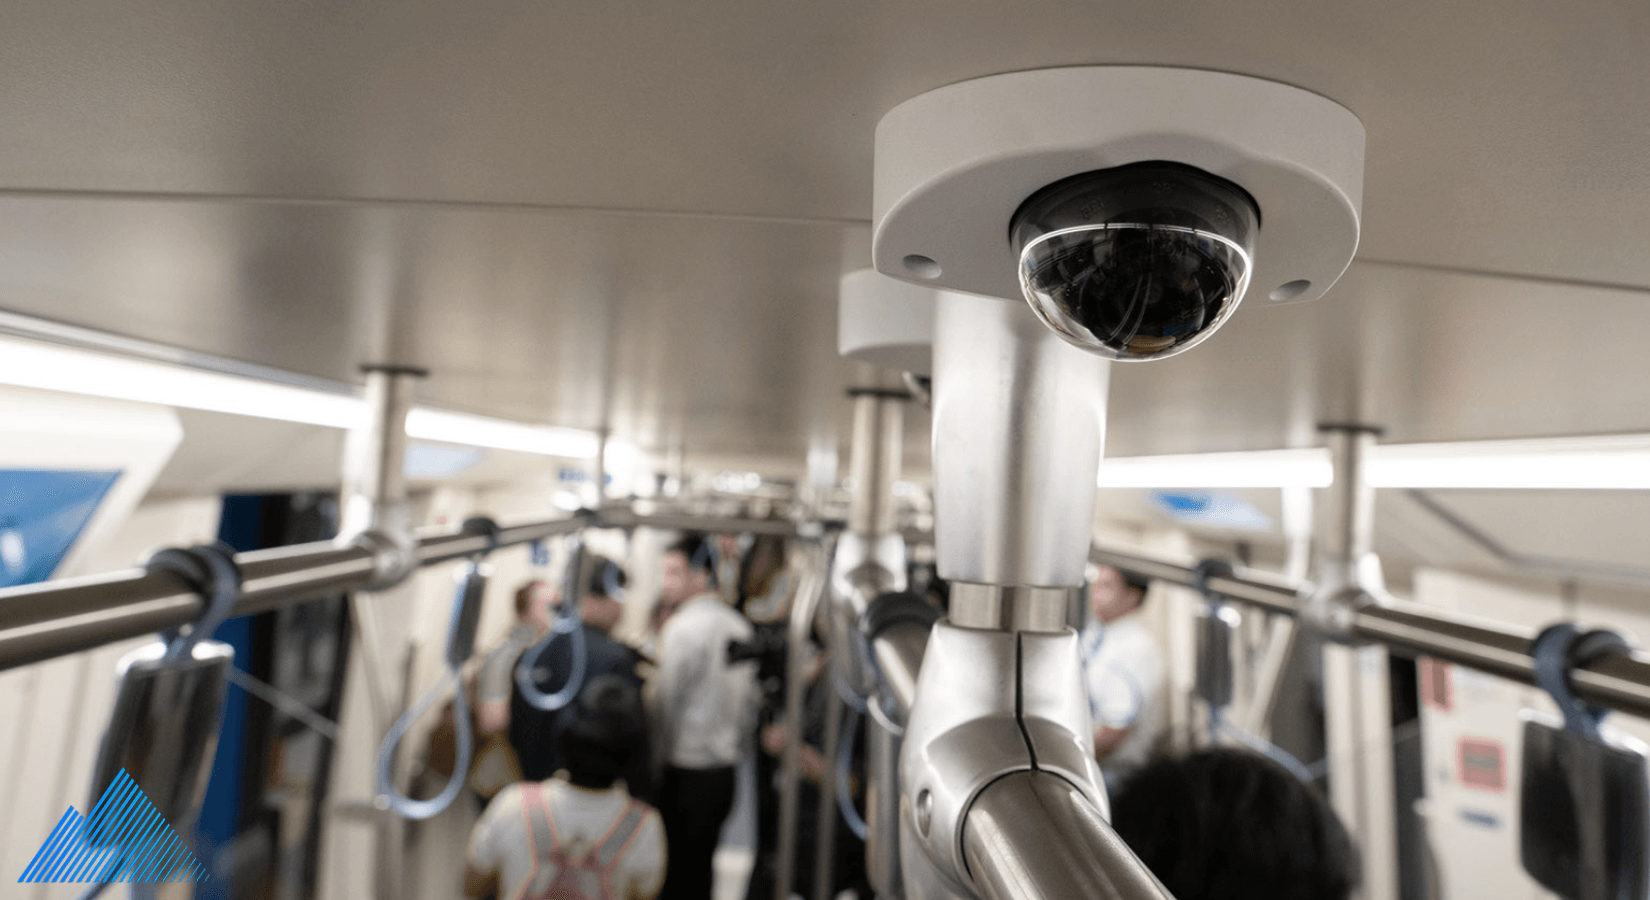 Dome camera mounted on ceiling of a subway